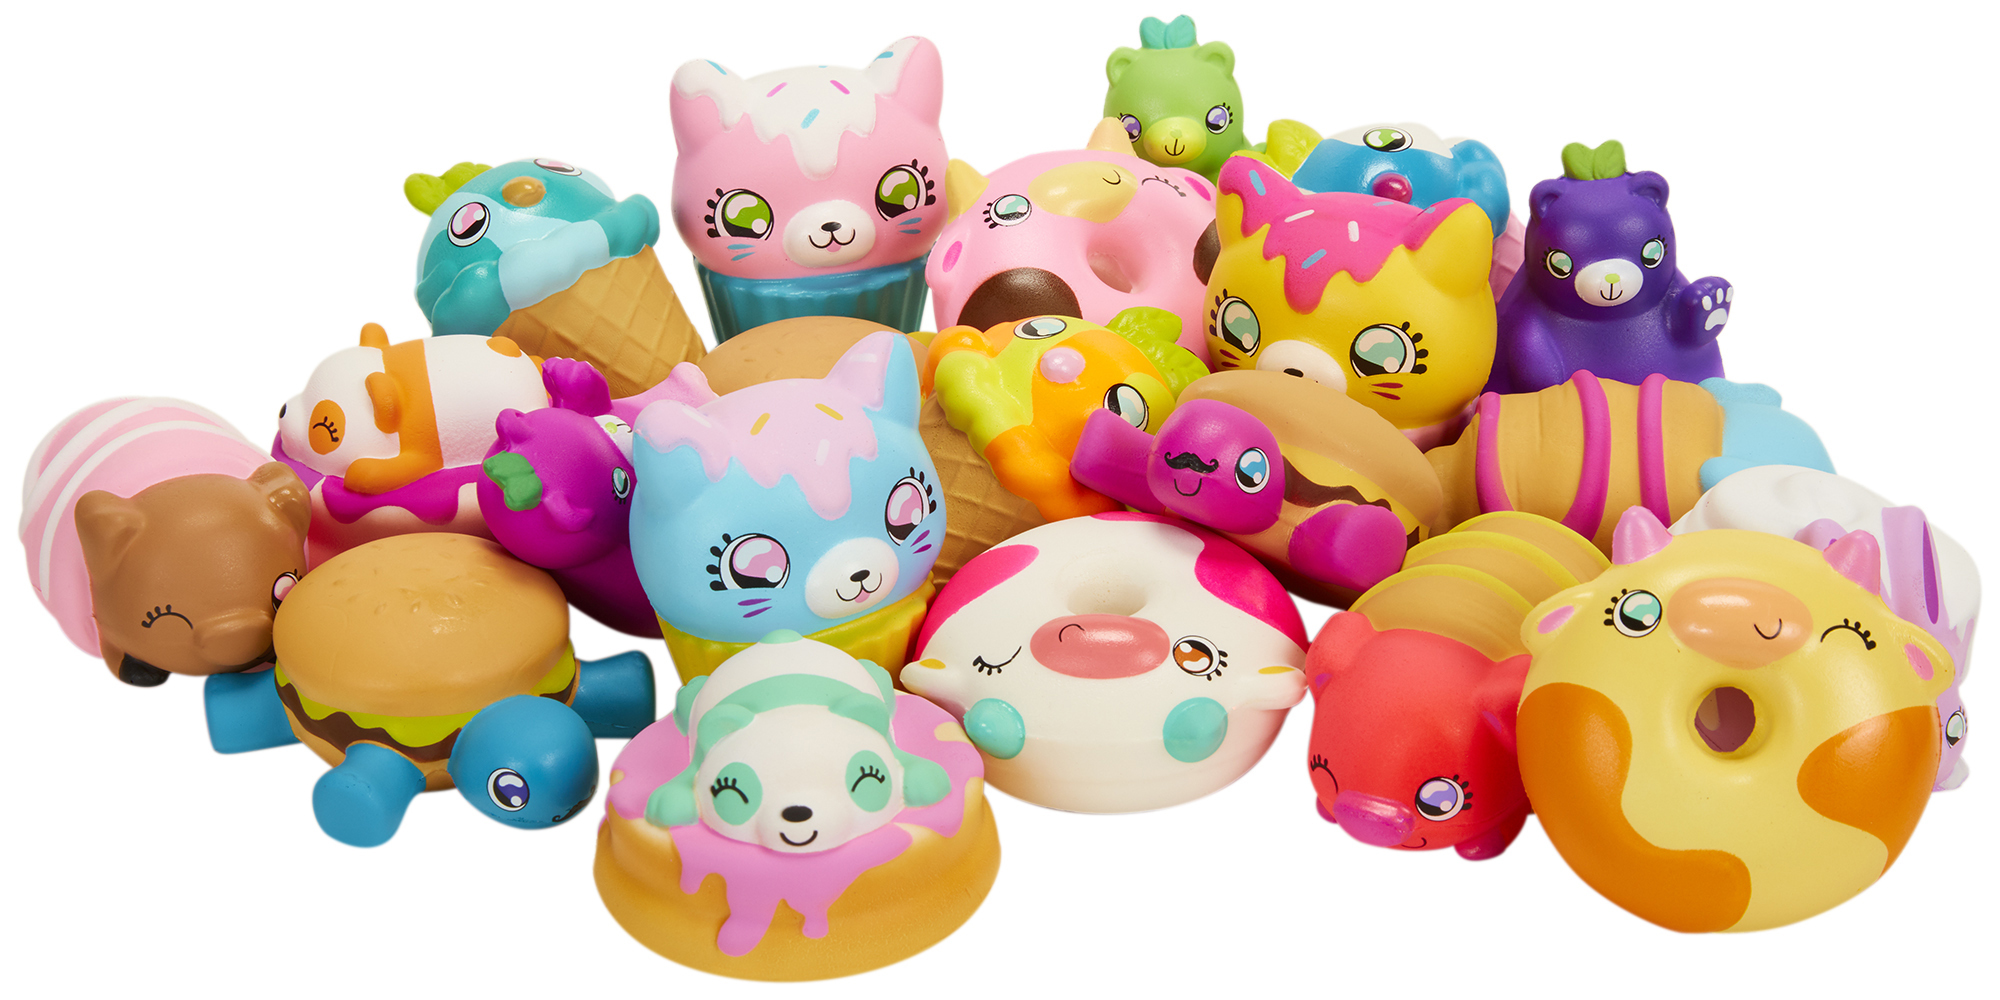 Squish Dee Lish Squishies By Jakks Pacific Will Become Your New